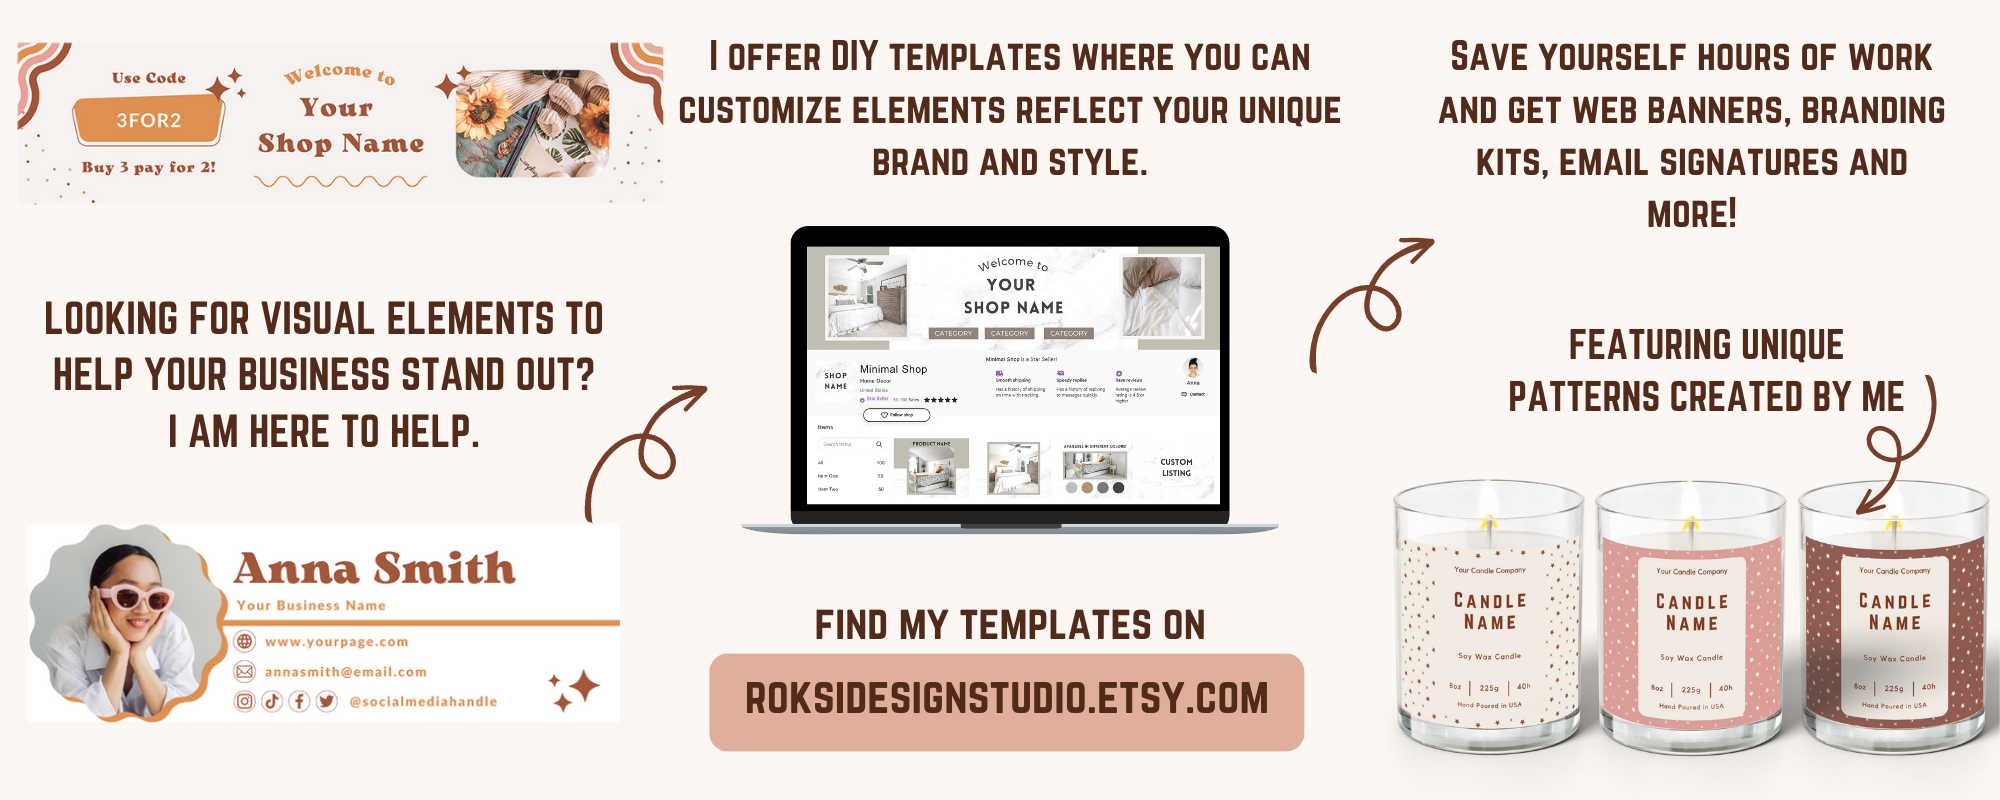 Are you looking for visual elements to help your business stand out? I am here to help. I offer DIY templates where you can customize elements to fit your unique brand and style. Save hours of work and get website banners, branding kits, email signatures and more!